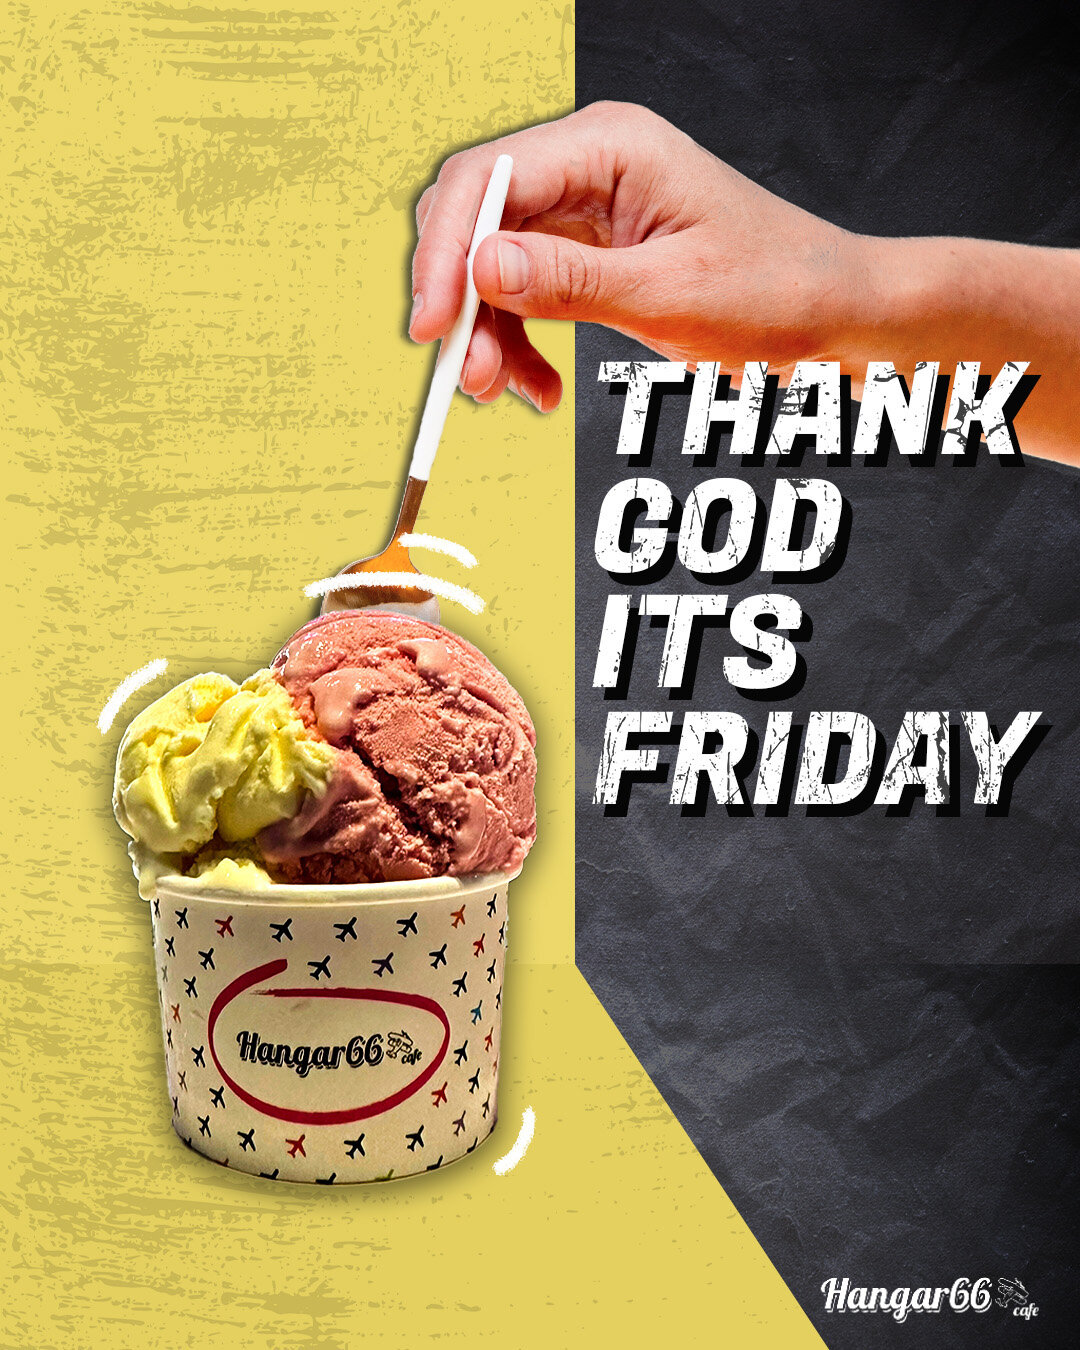 Fridays just got even better! It is *FREE FLOW ICE CREAM day 🙋🏻&zwj;♀️ Come on down, bring your kids along and enjoy a wide variety of flavours and maybe even different toppings!

We can't wait to see you all enjoying and relishing every scoop of o